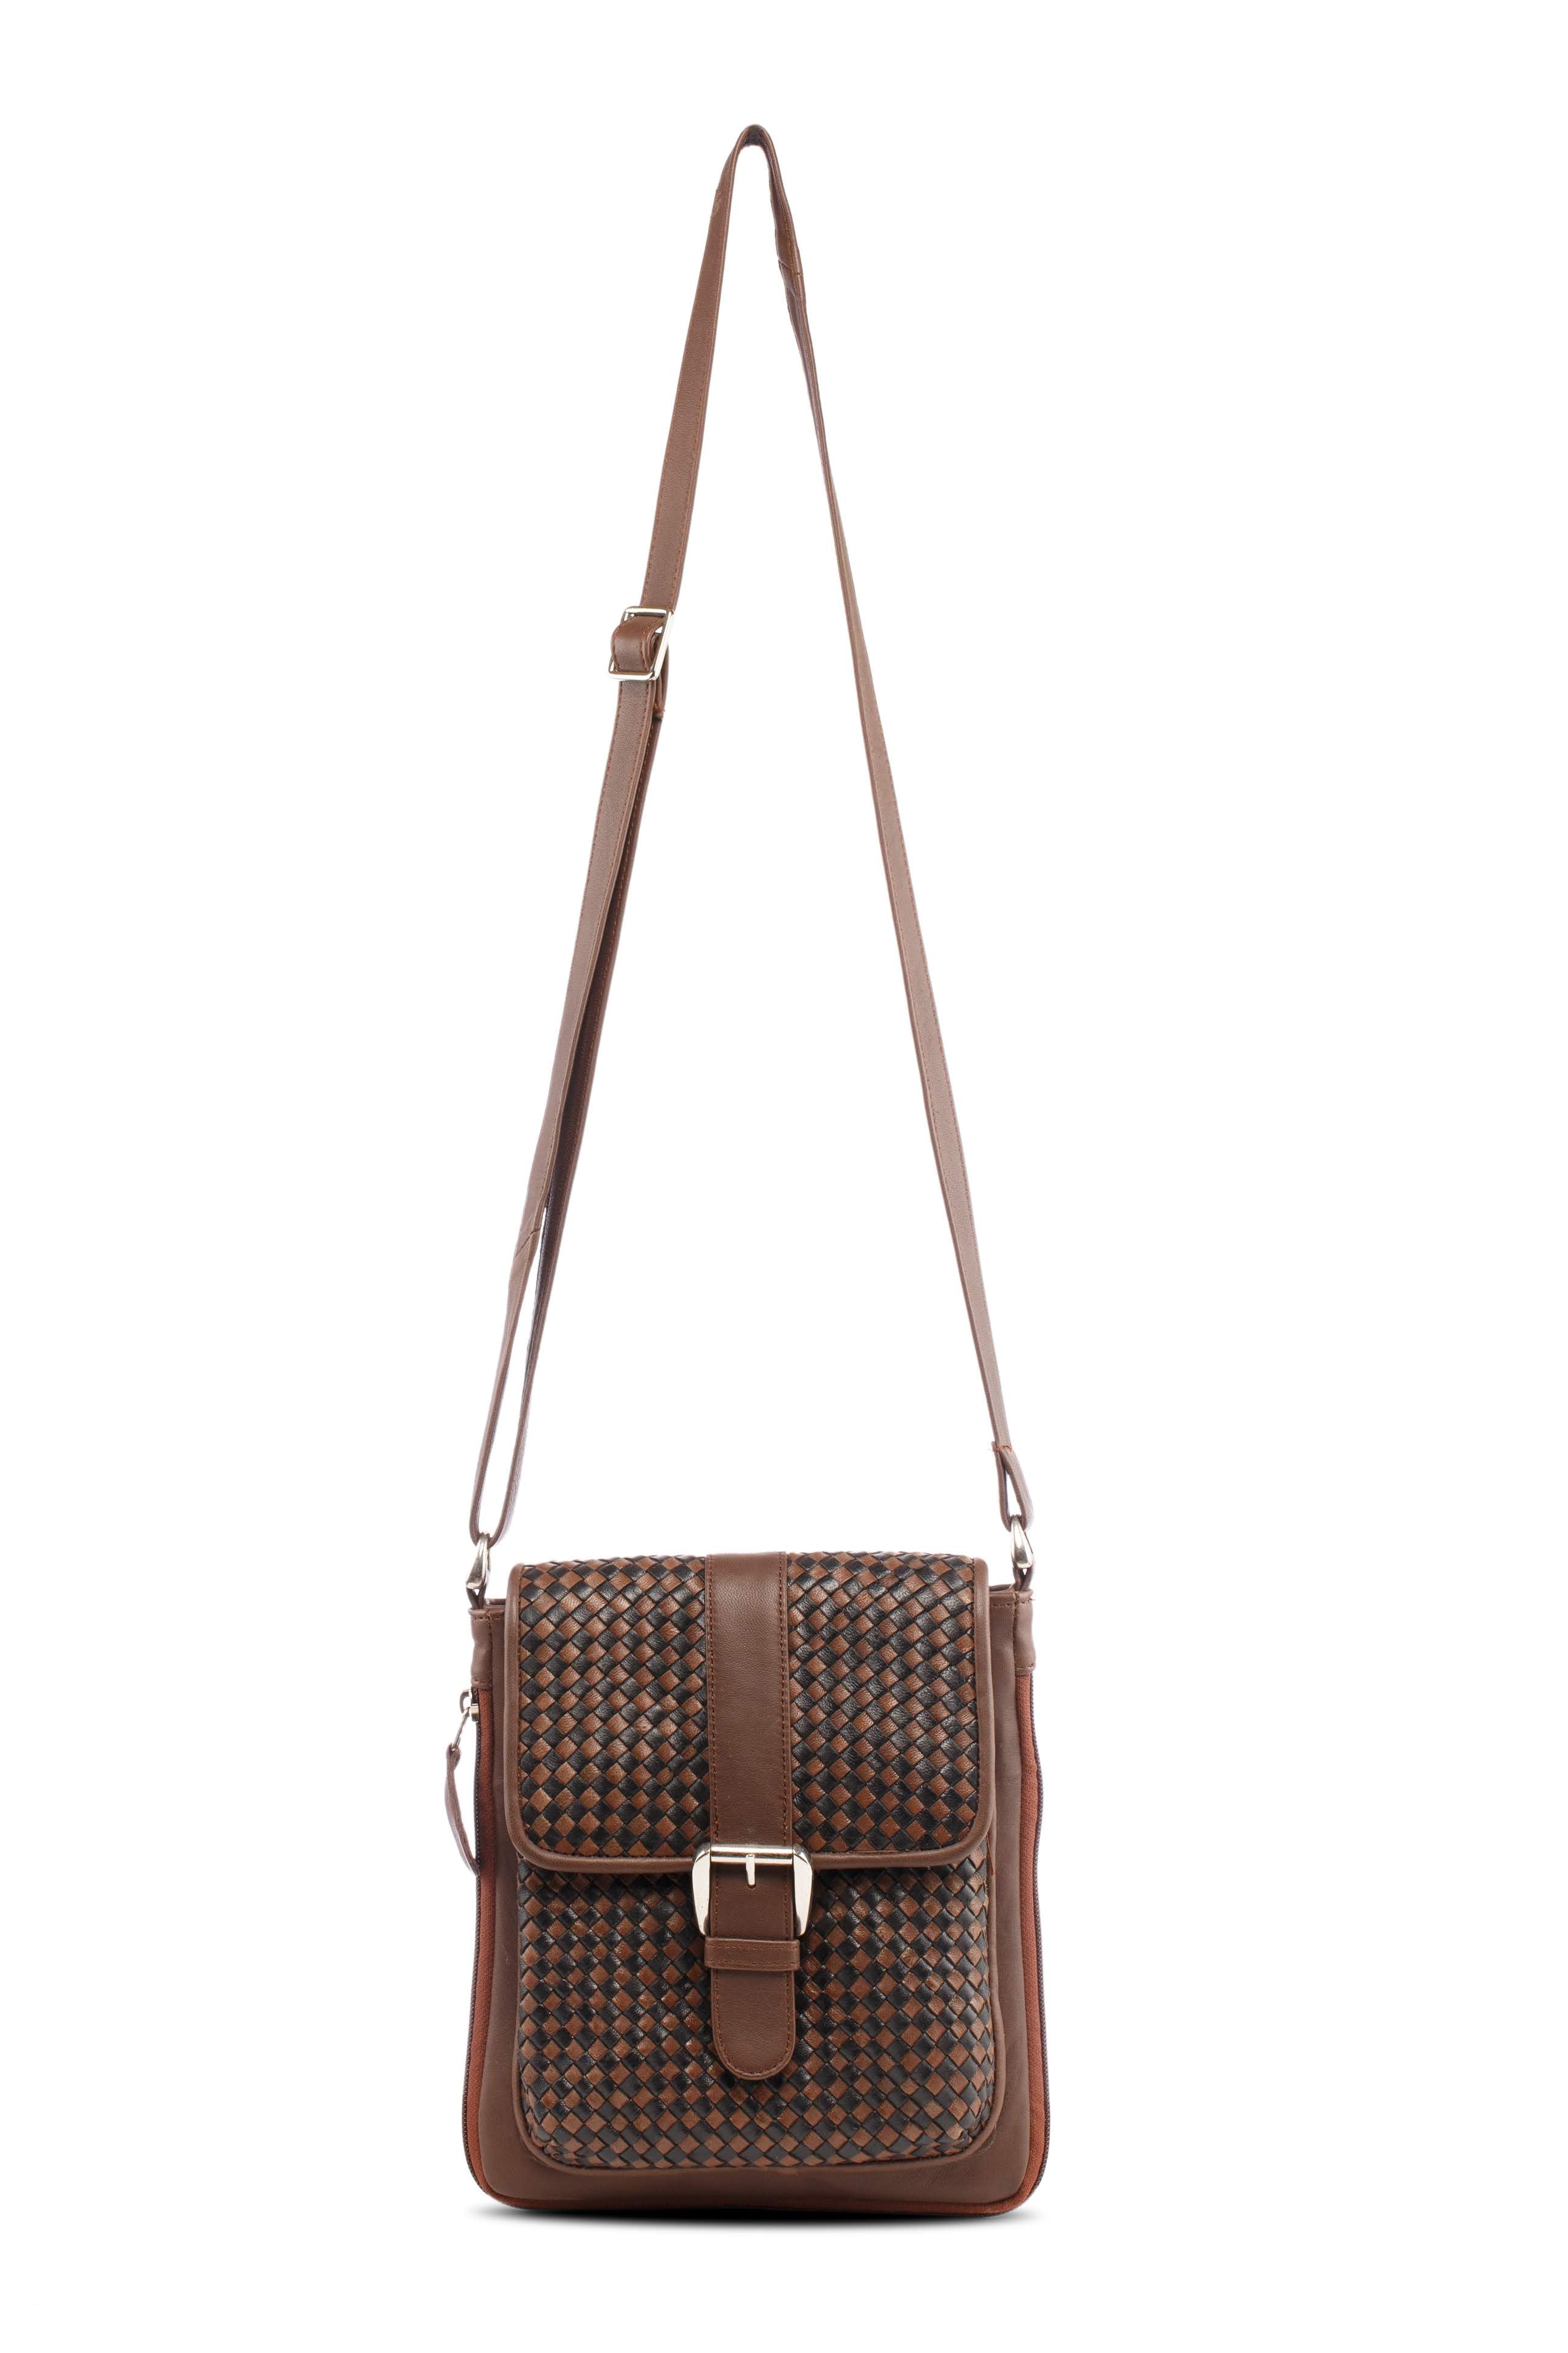 Knitted Leather Cross Body Bag Black and Brown